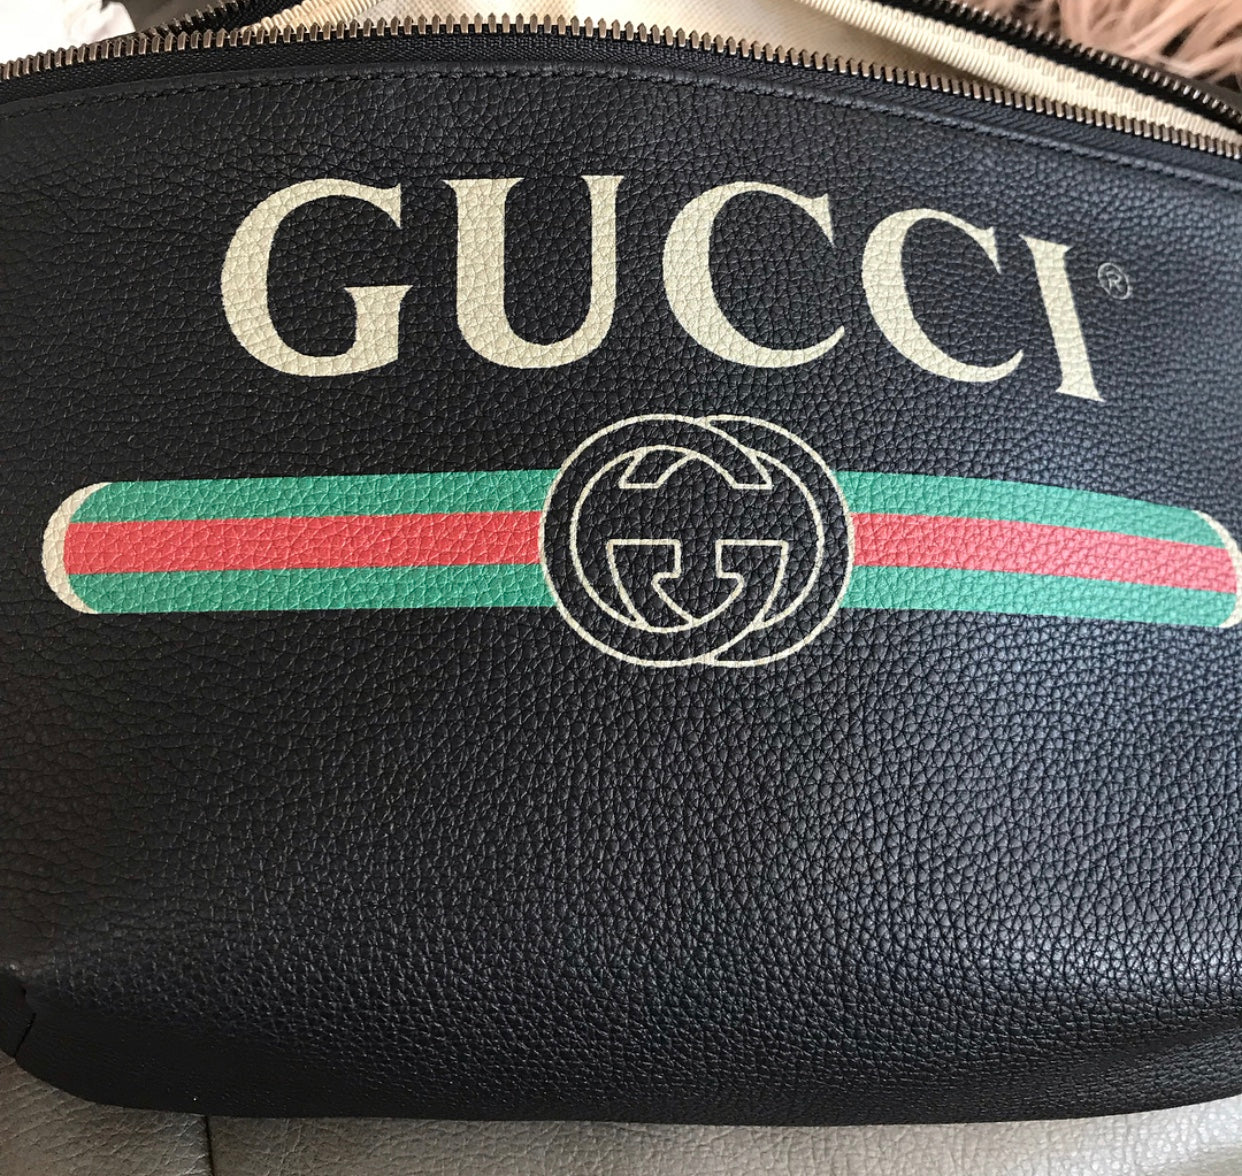 large gucci fanny pack